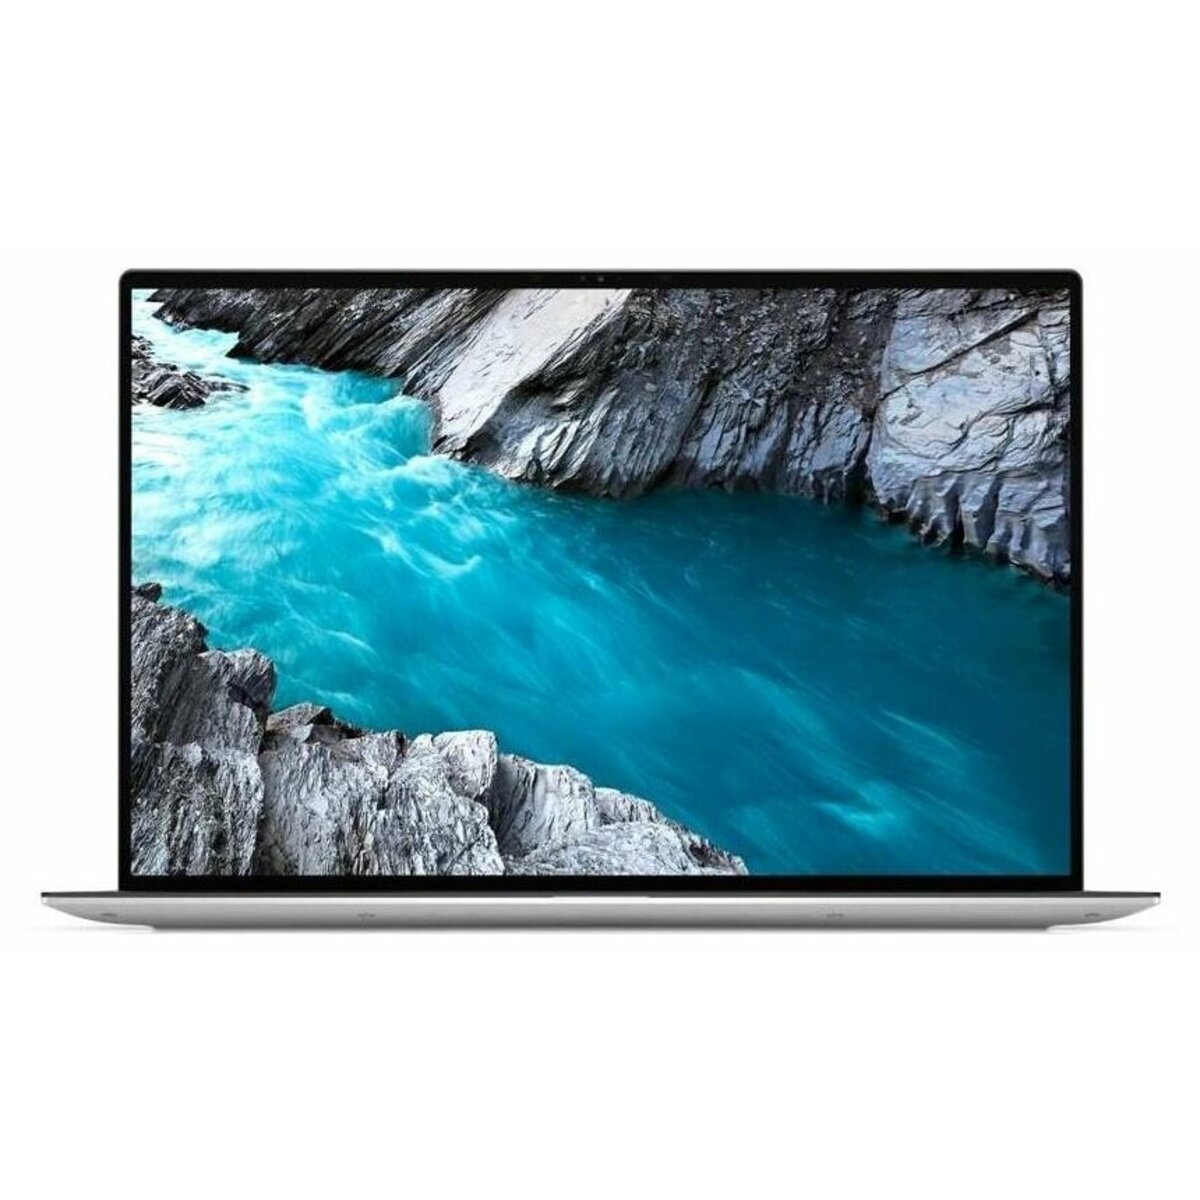 Ультрабук Dell XPS 13 9310 Core i7 1185G7 16Gb SSD512Gb Intel Iris Xe graphics 13.4 Touch FHD+ (1920x1200) Windows 11 silver WiFi BT Cam